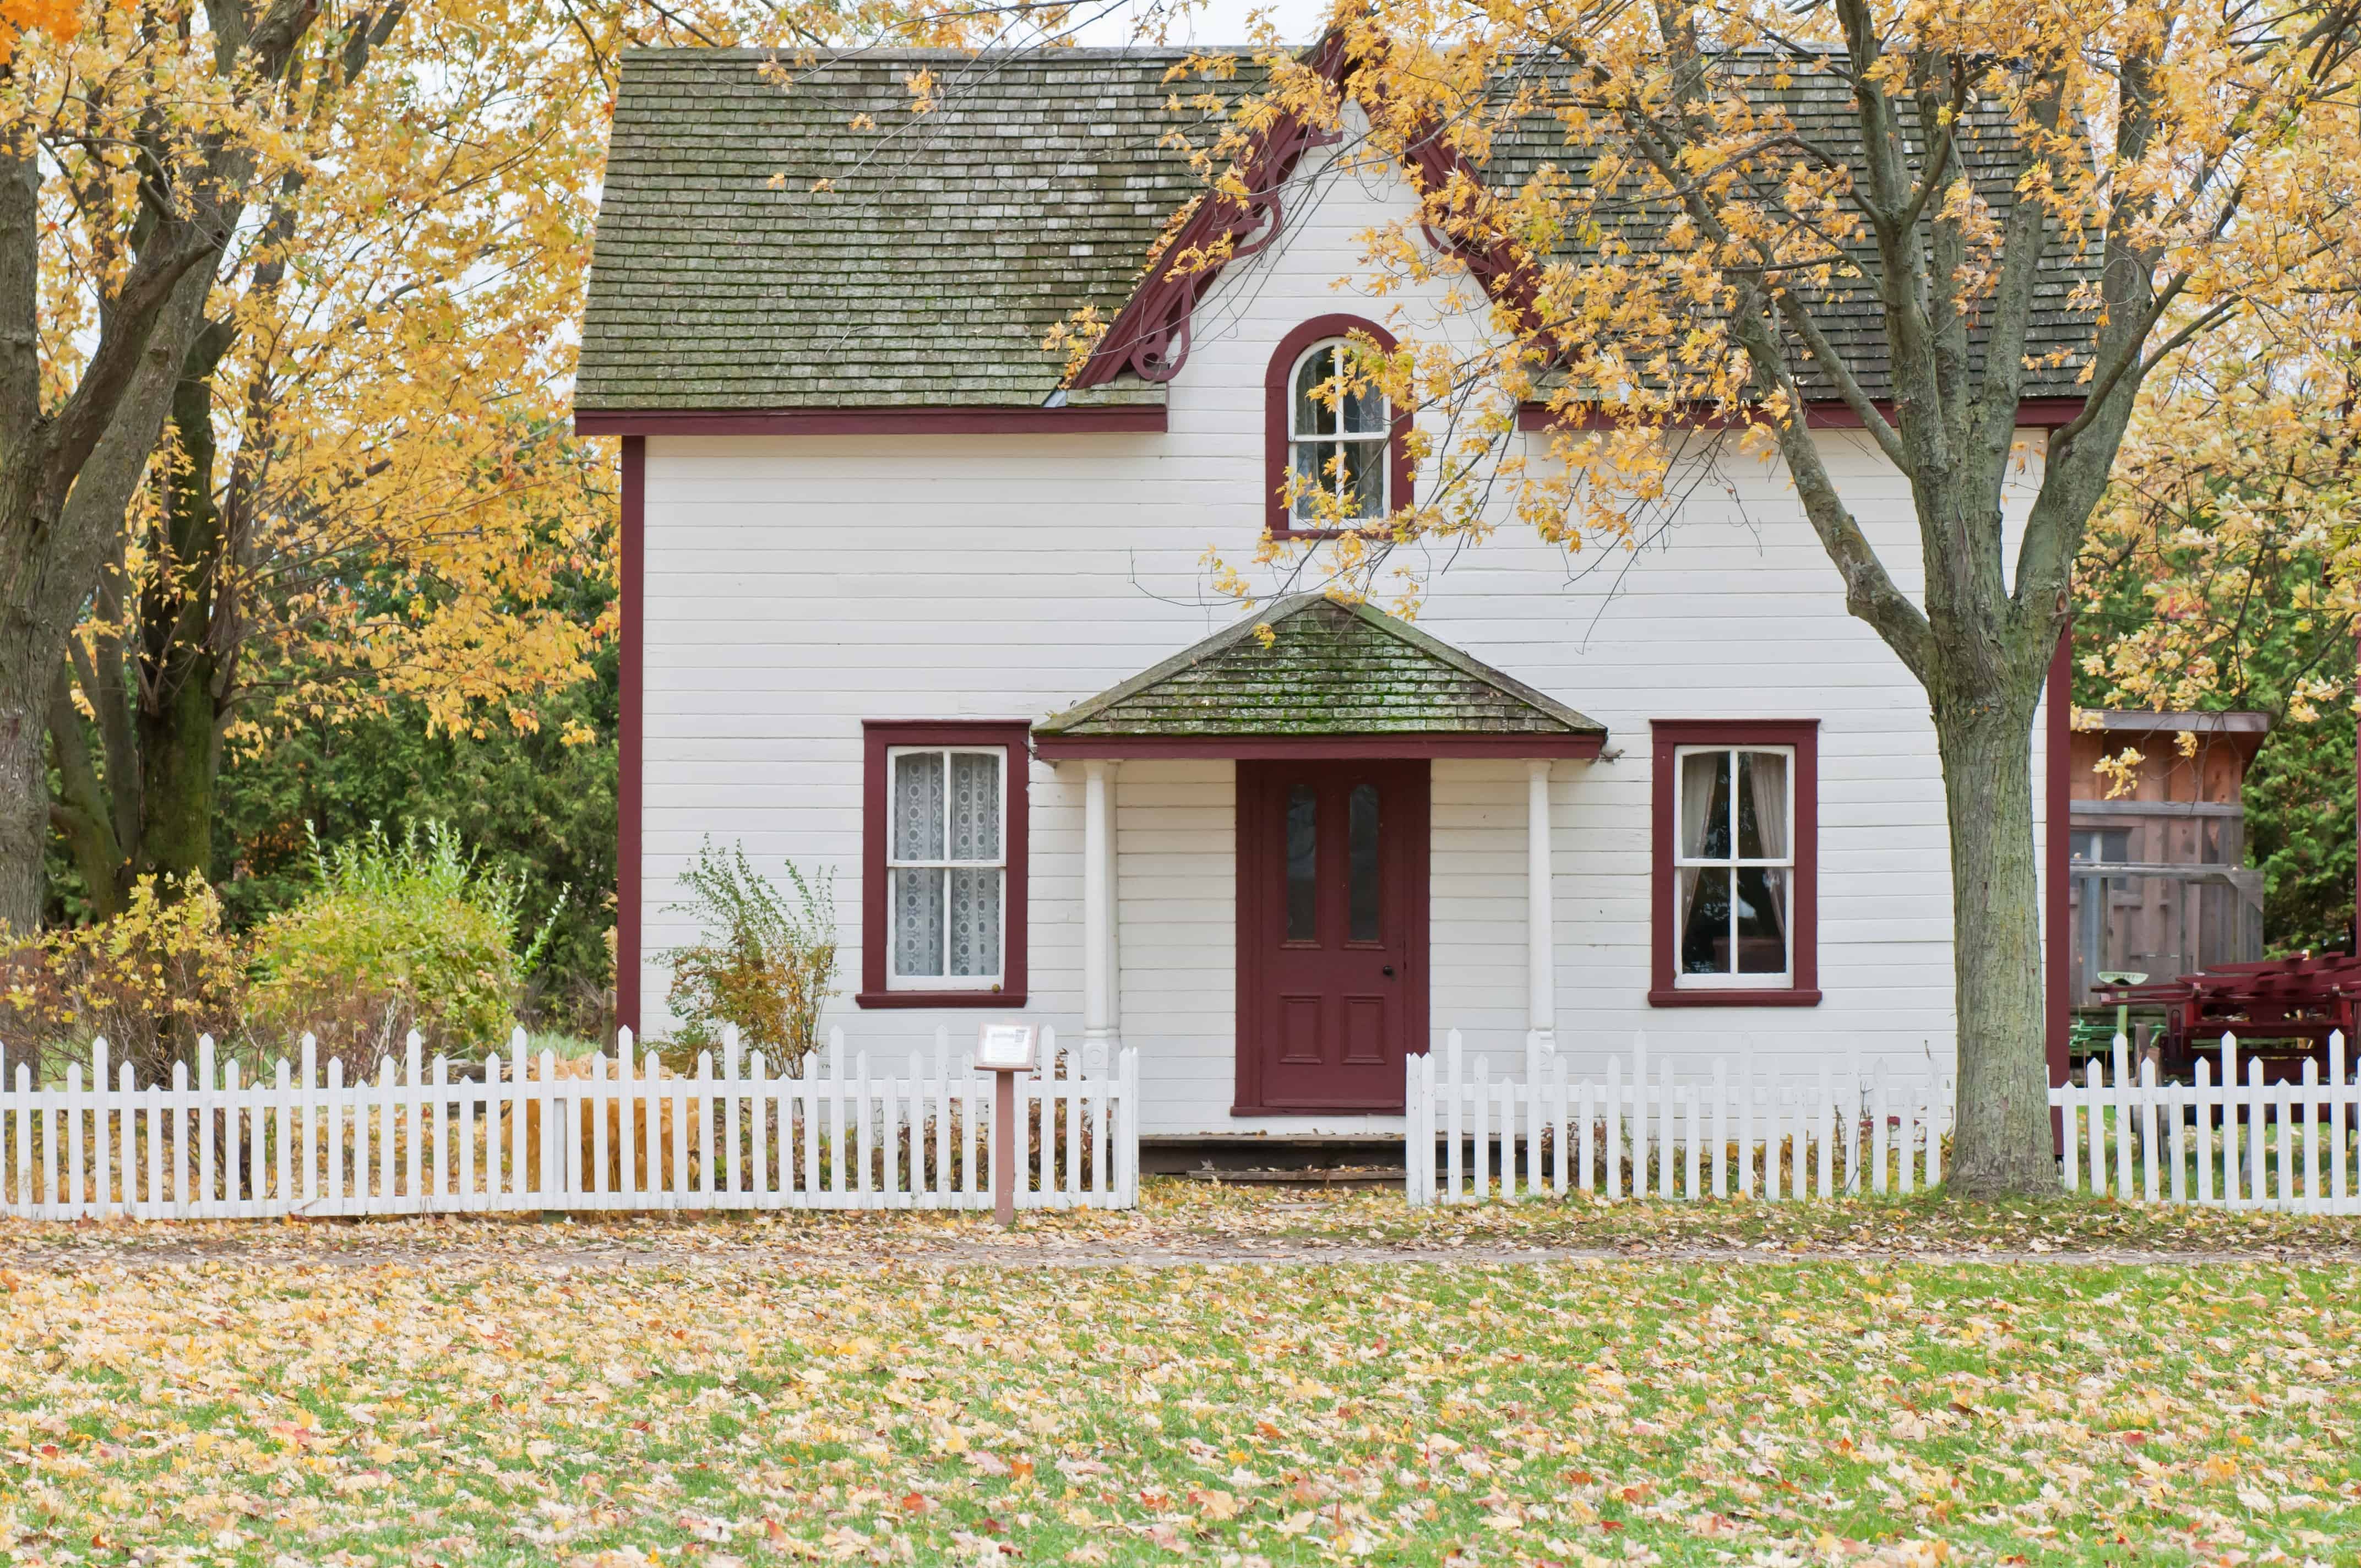 A house in autumn